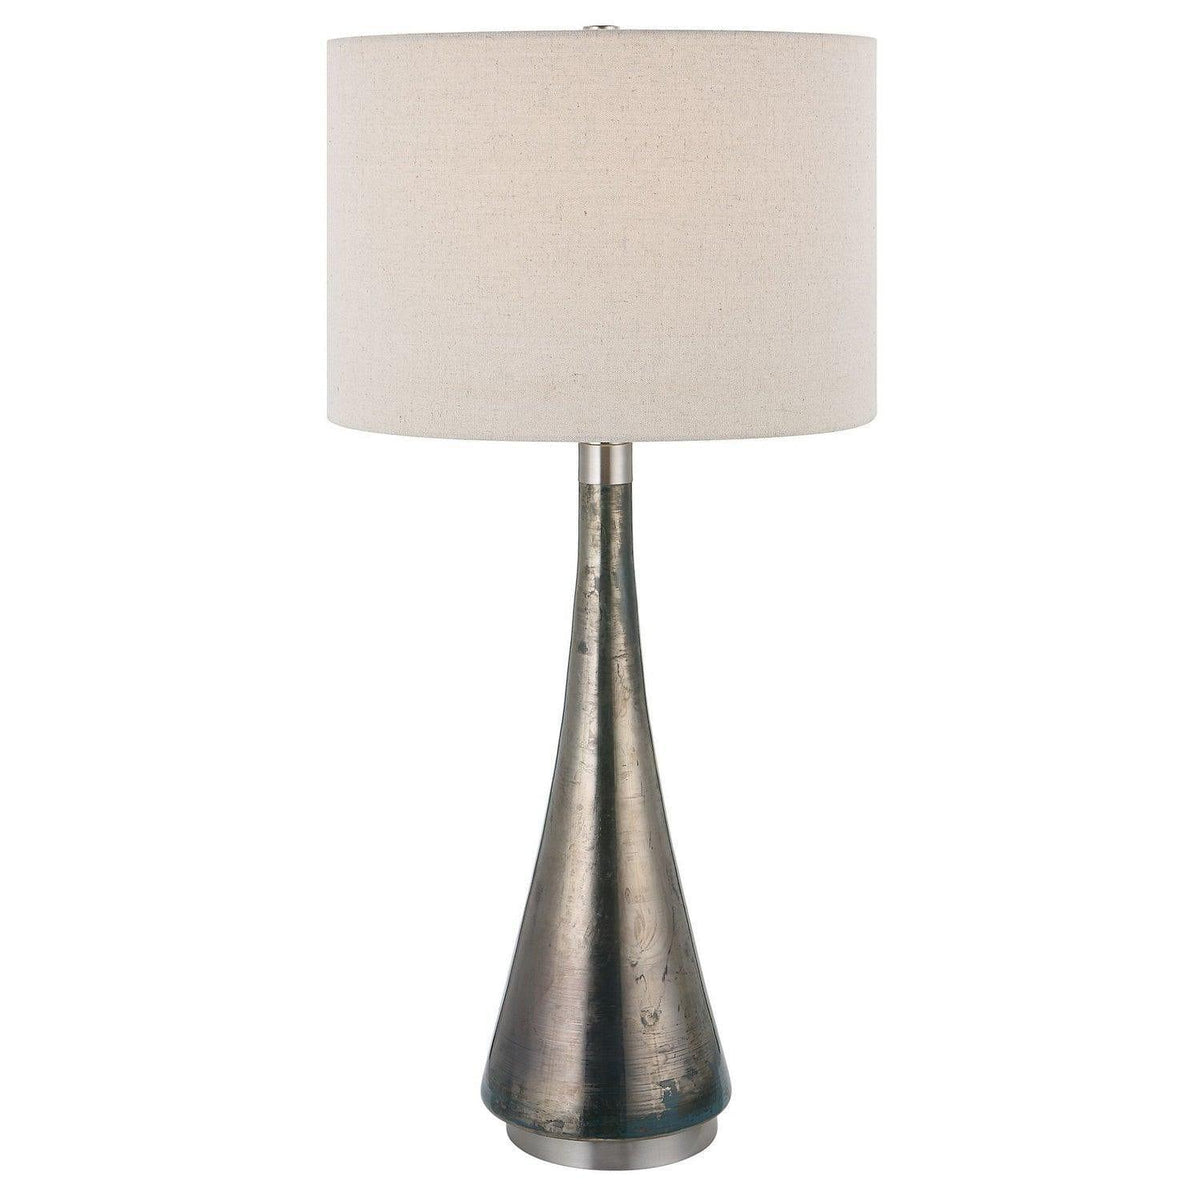 The Uttermost - Contour Table Lamp - 30039 | Montreal Lighting & Hardware